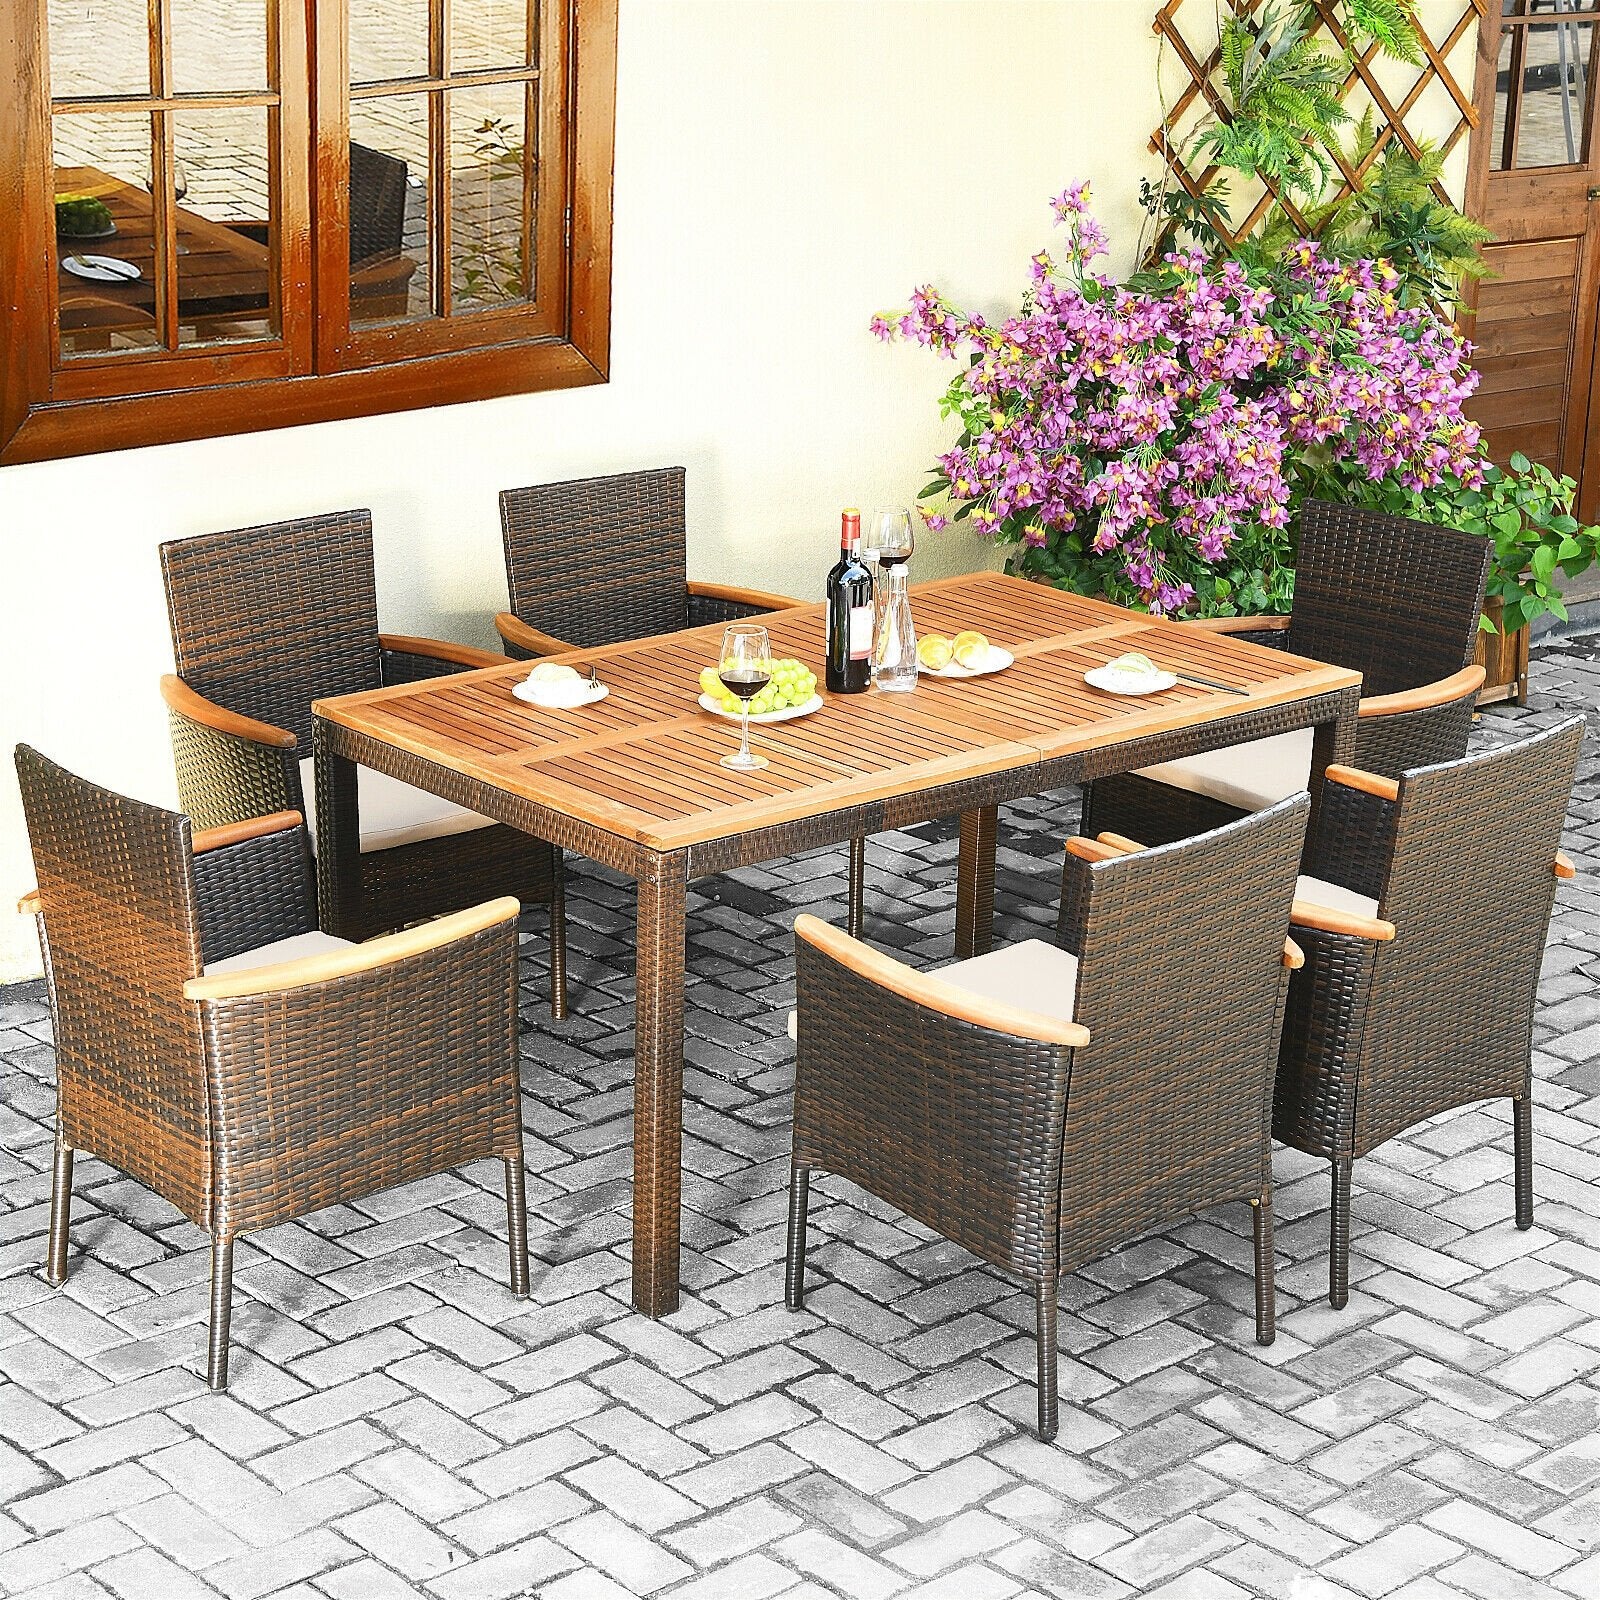 7 Pieces Patio Rattan Dining Set with Armrest Cushioned Chair and Umbrella Hole, Brown - Gallery Canada